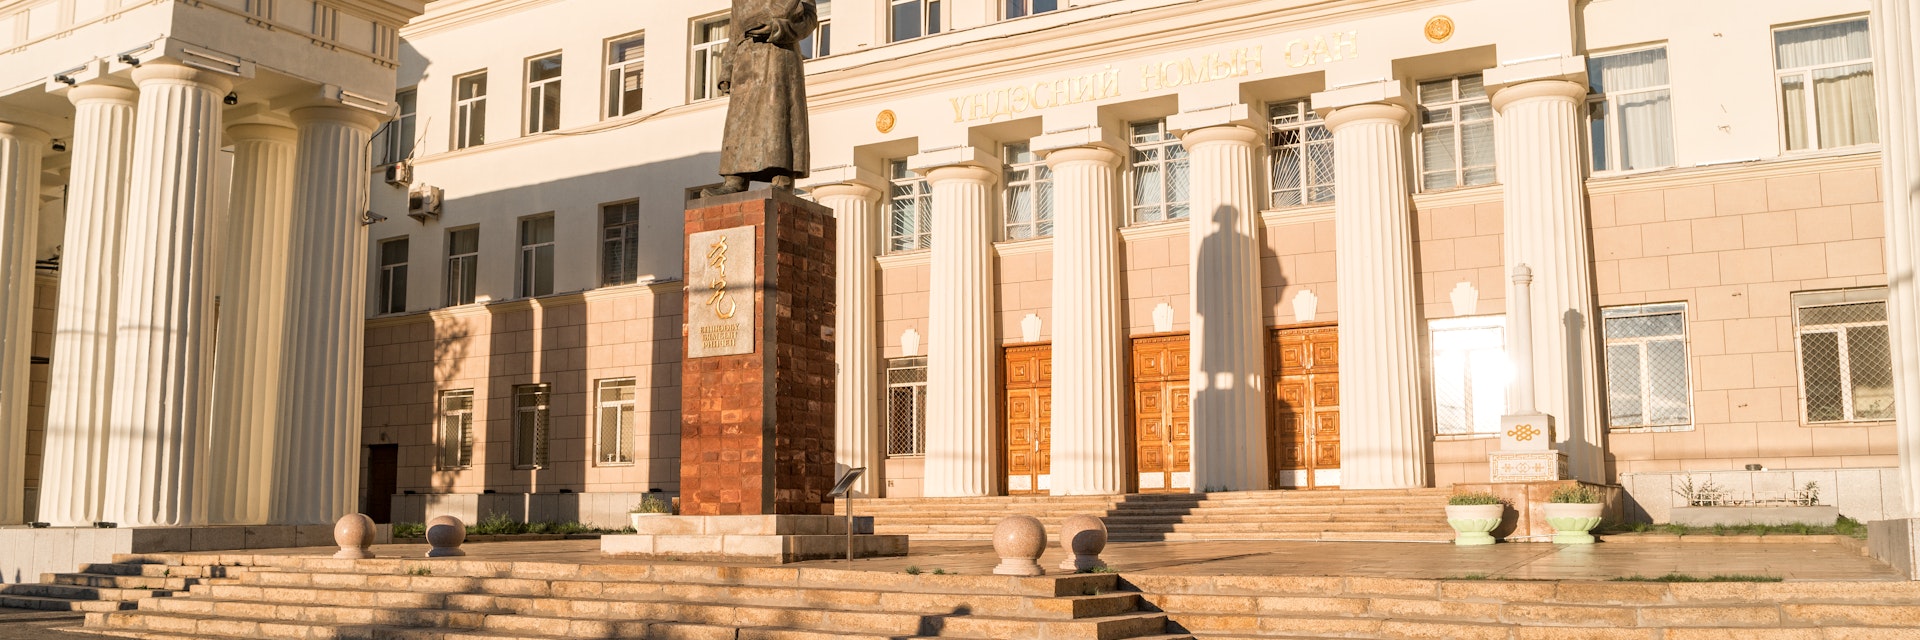 Ulaanbaatar, Mongolia - August 8, 2018: National Library of Mongolia with statue of Byambyn Rinchen in front of building.; Shutterstock ID 1596873190; your: Barbara Di Castro; gl: 65050; netsuite: digital; full: poi
1596873190